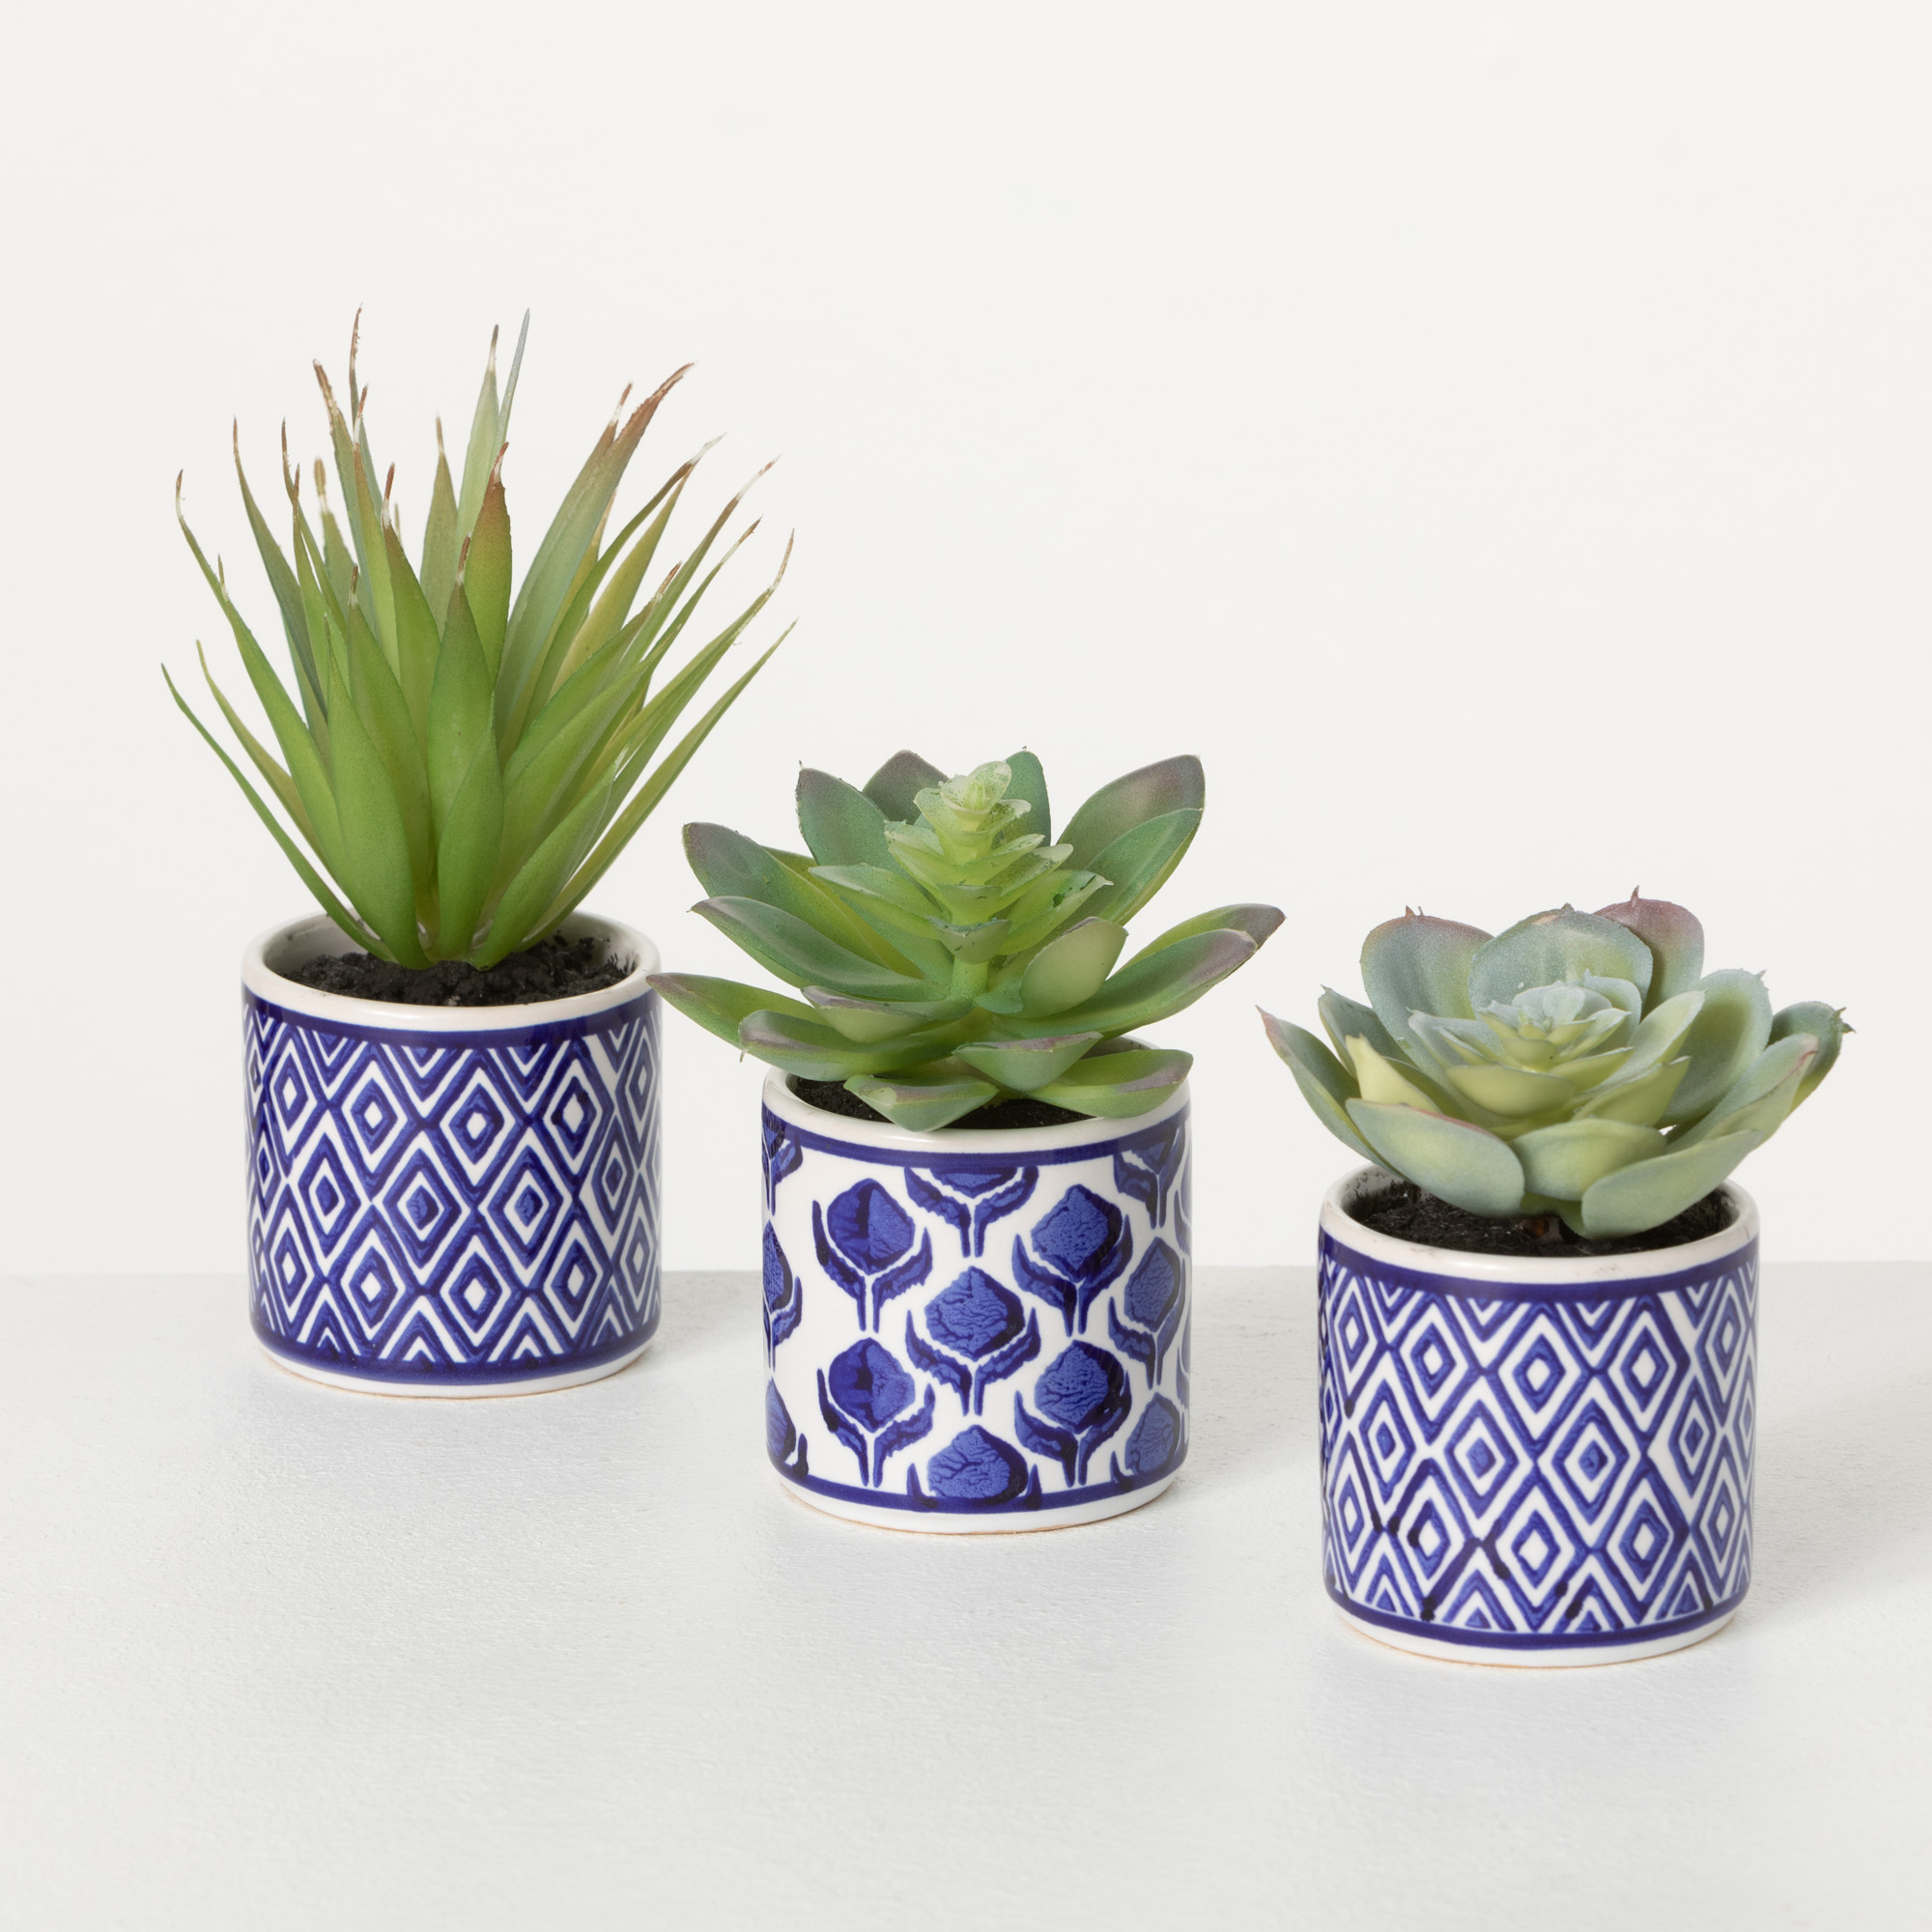 Sullivans Artificial Succulent Trio In Printed Pots Set of 3, 4"H Green - image 1 of 4